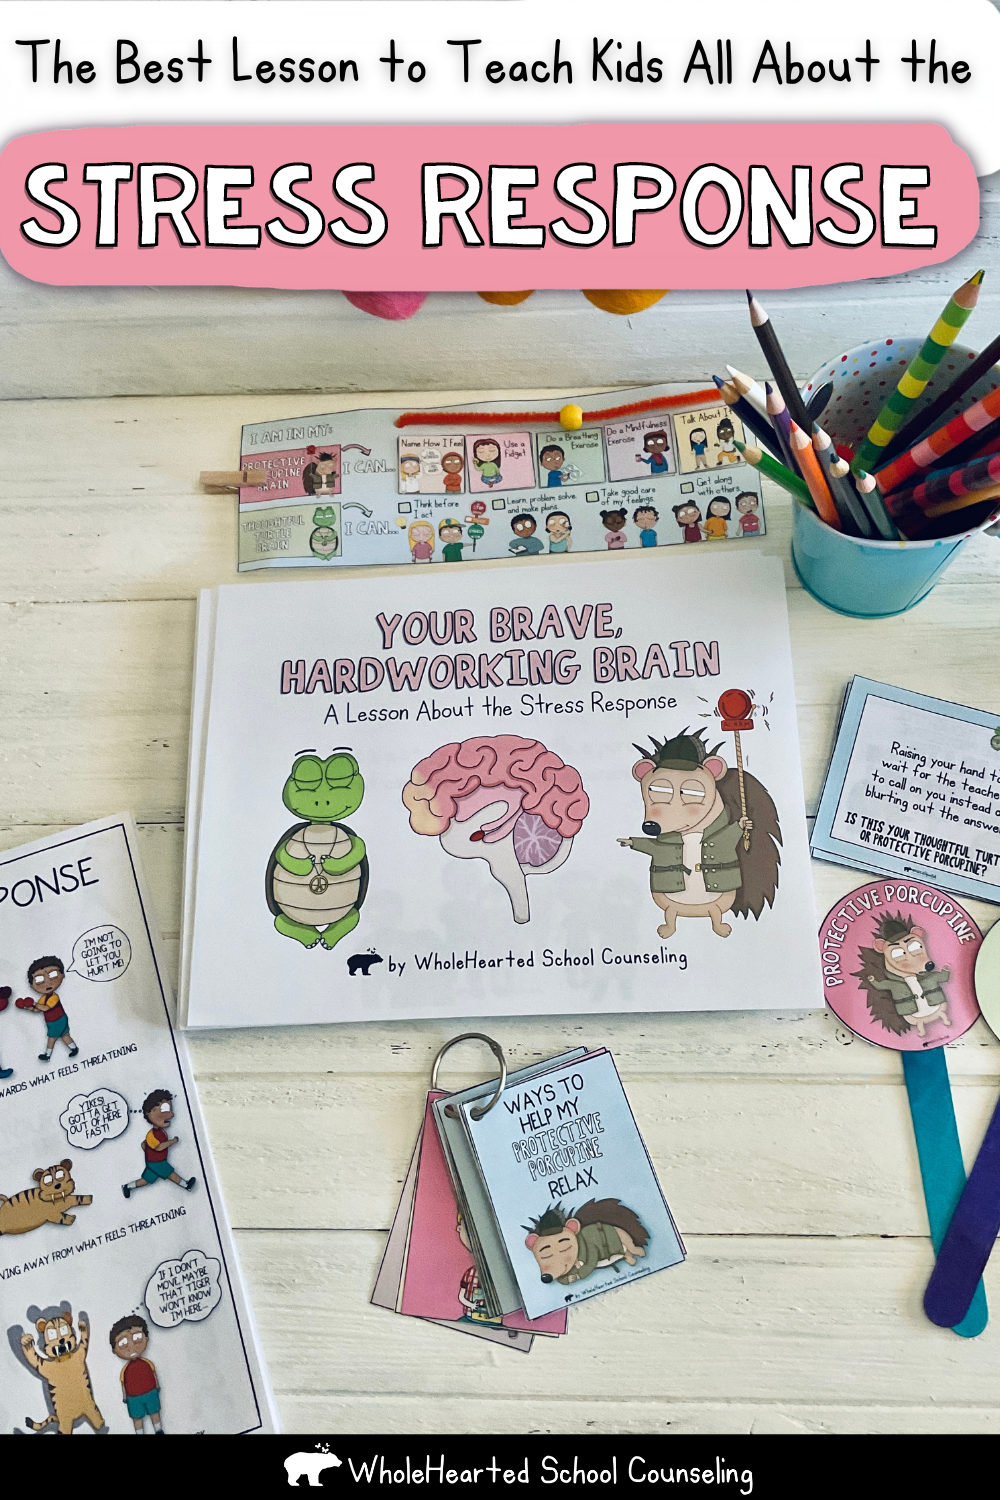 Printed lesson and posters of the Brain and Stress Response lesson for kids